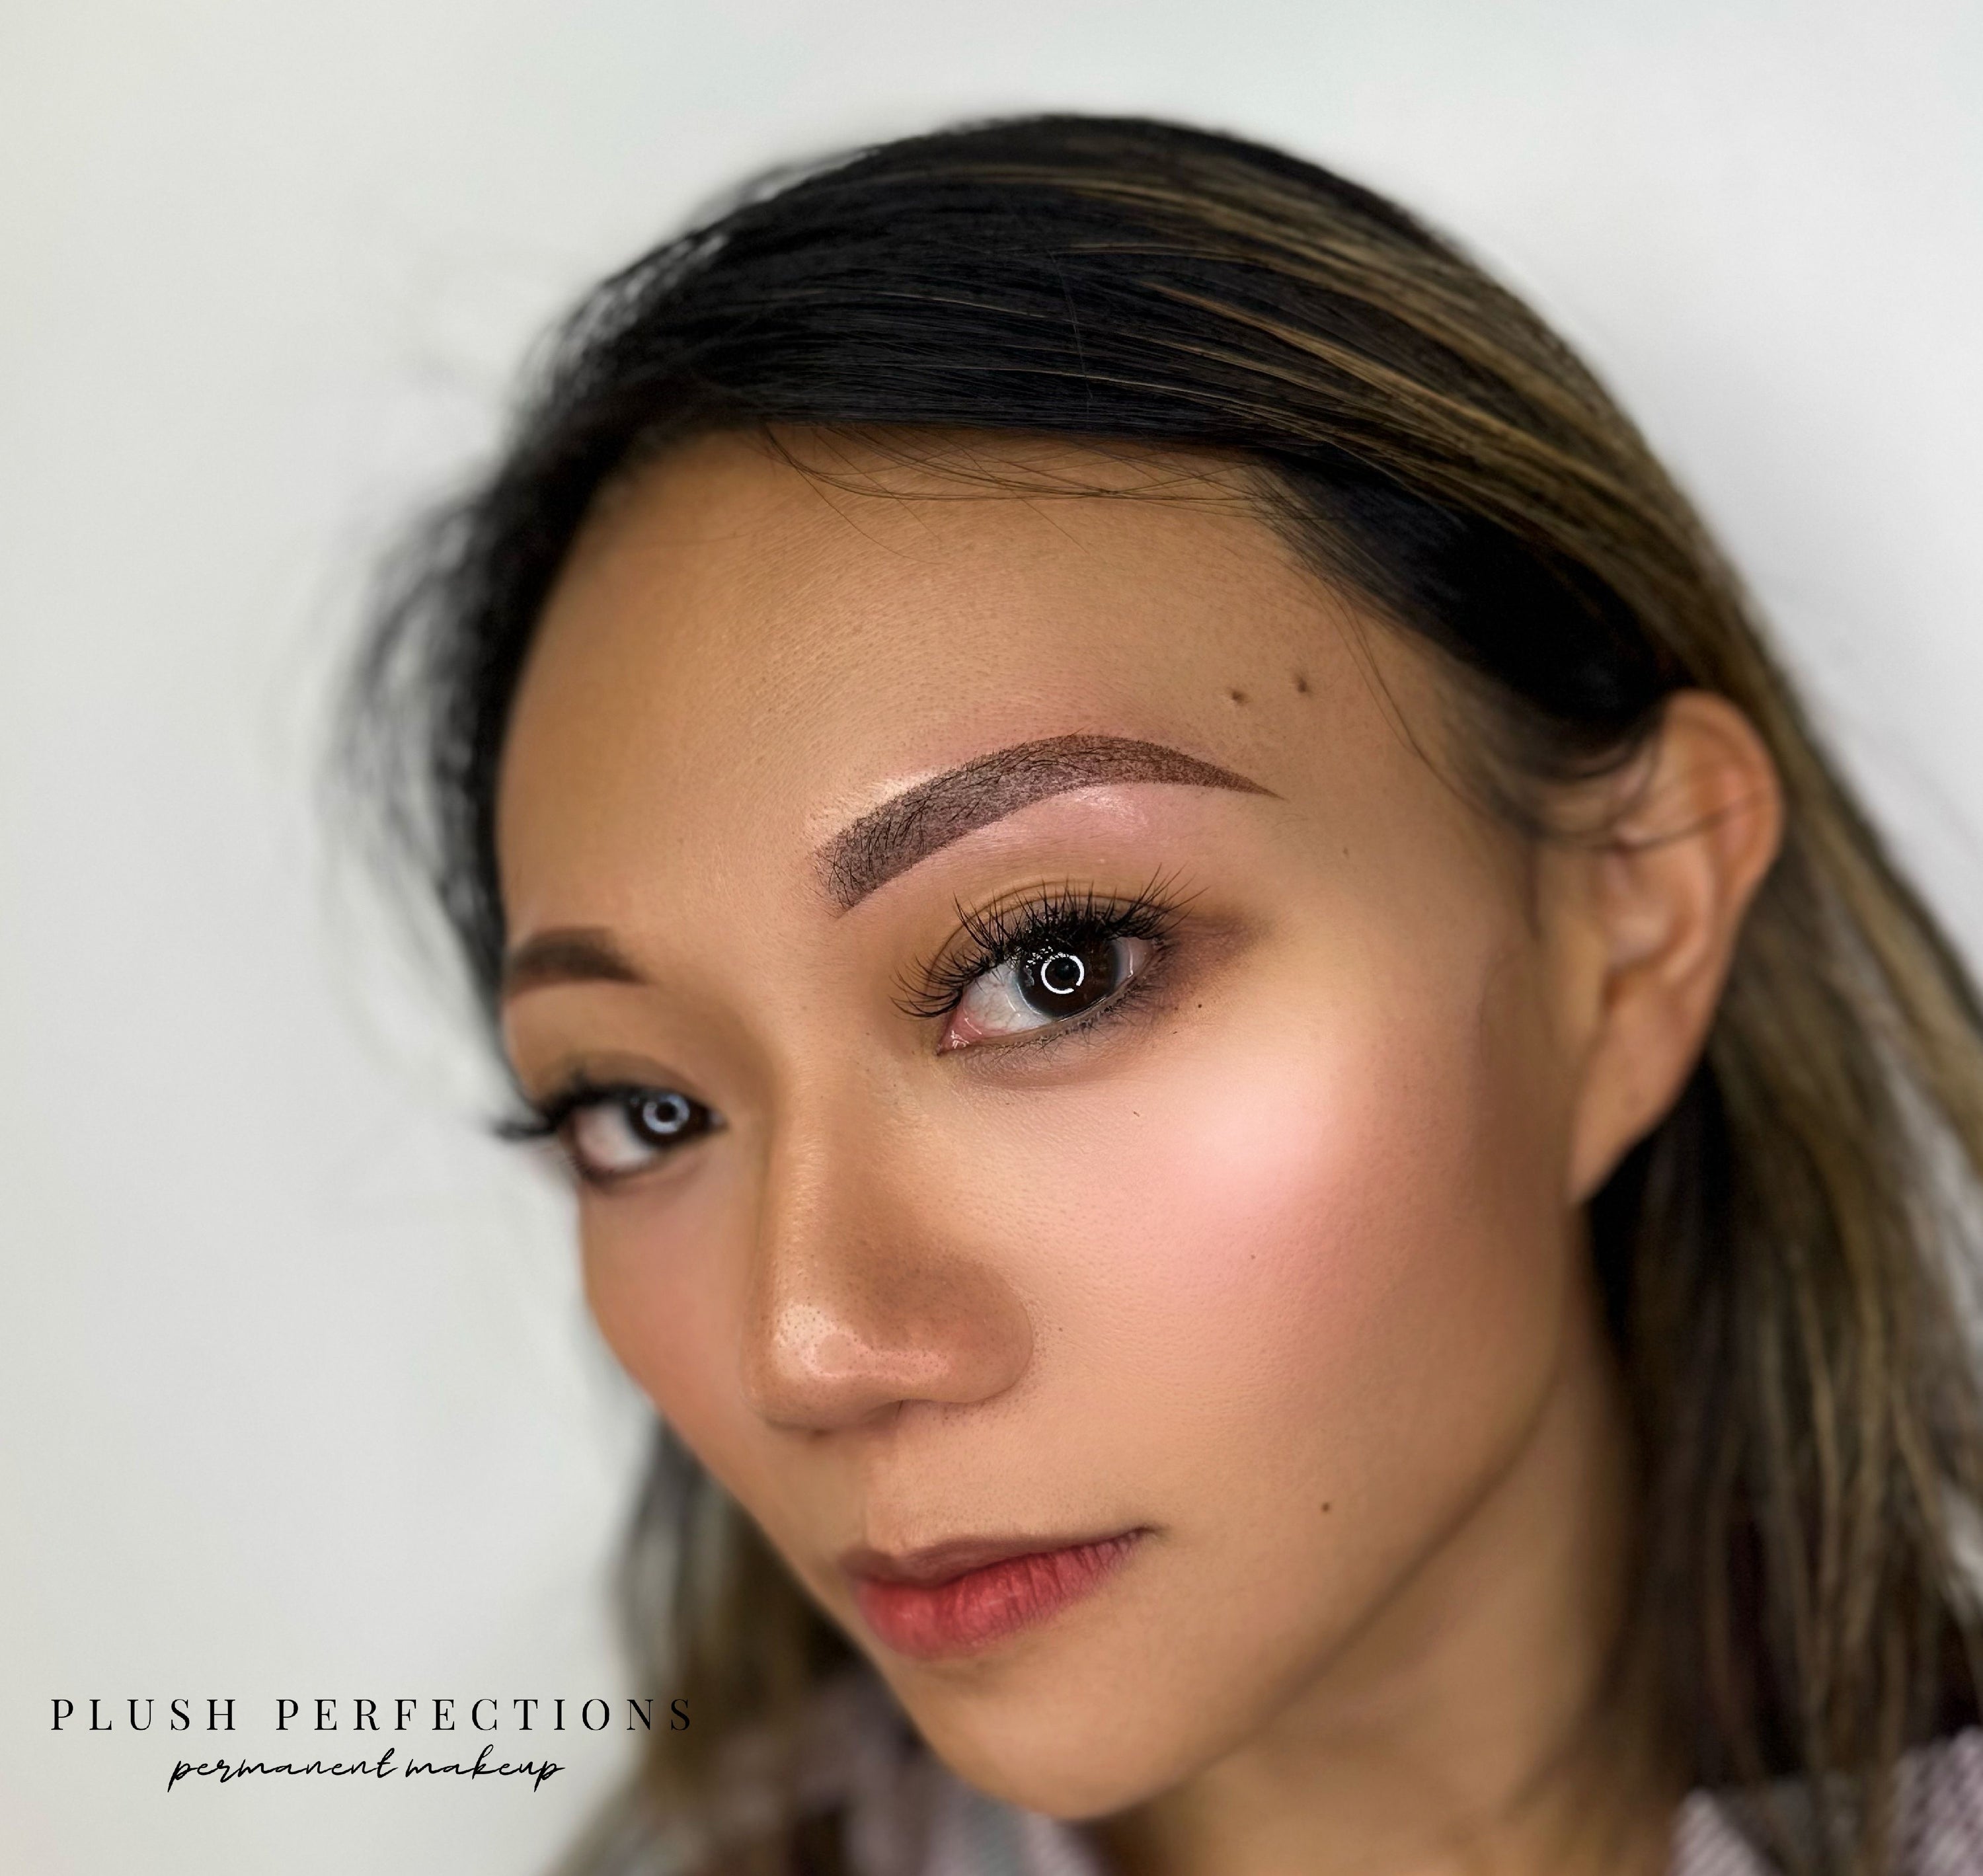 Plush Perfections Powder Ombre in Vancouver Cosmetic Tattoo Eyebrows